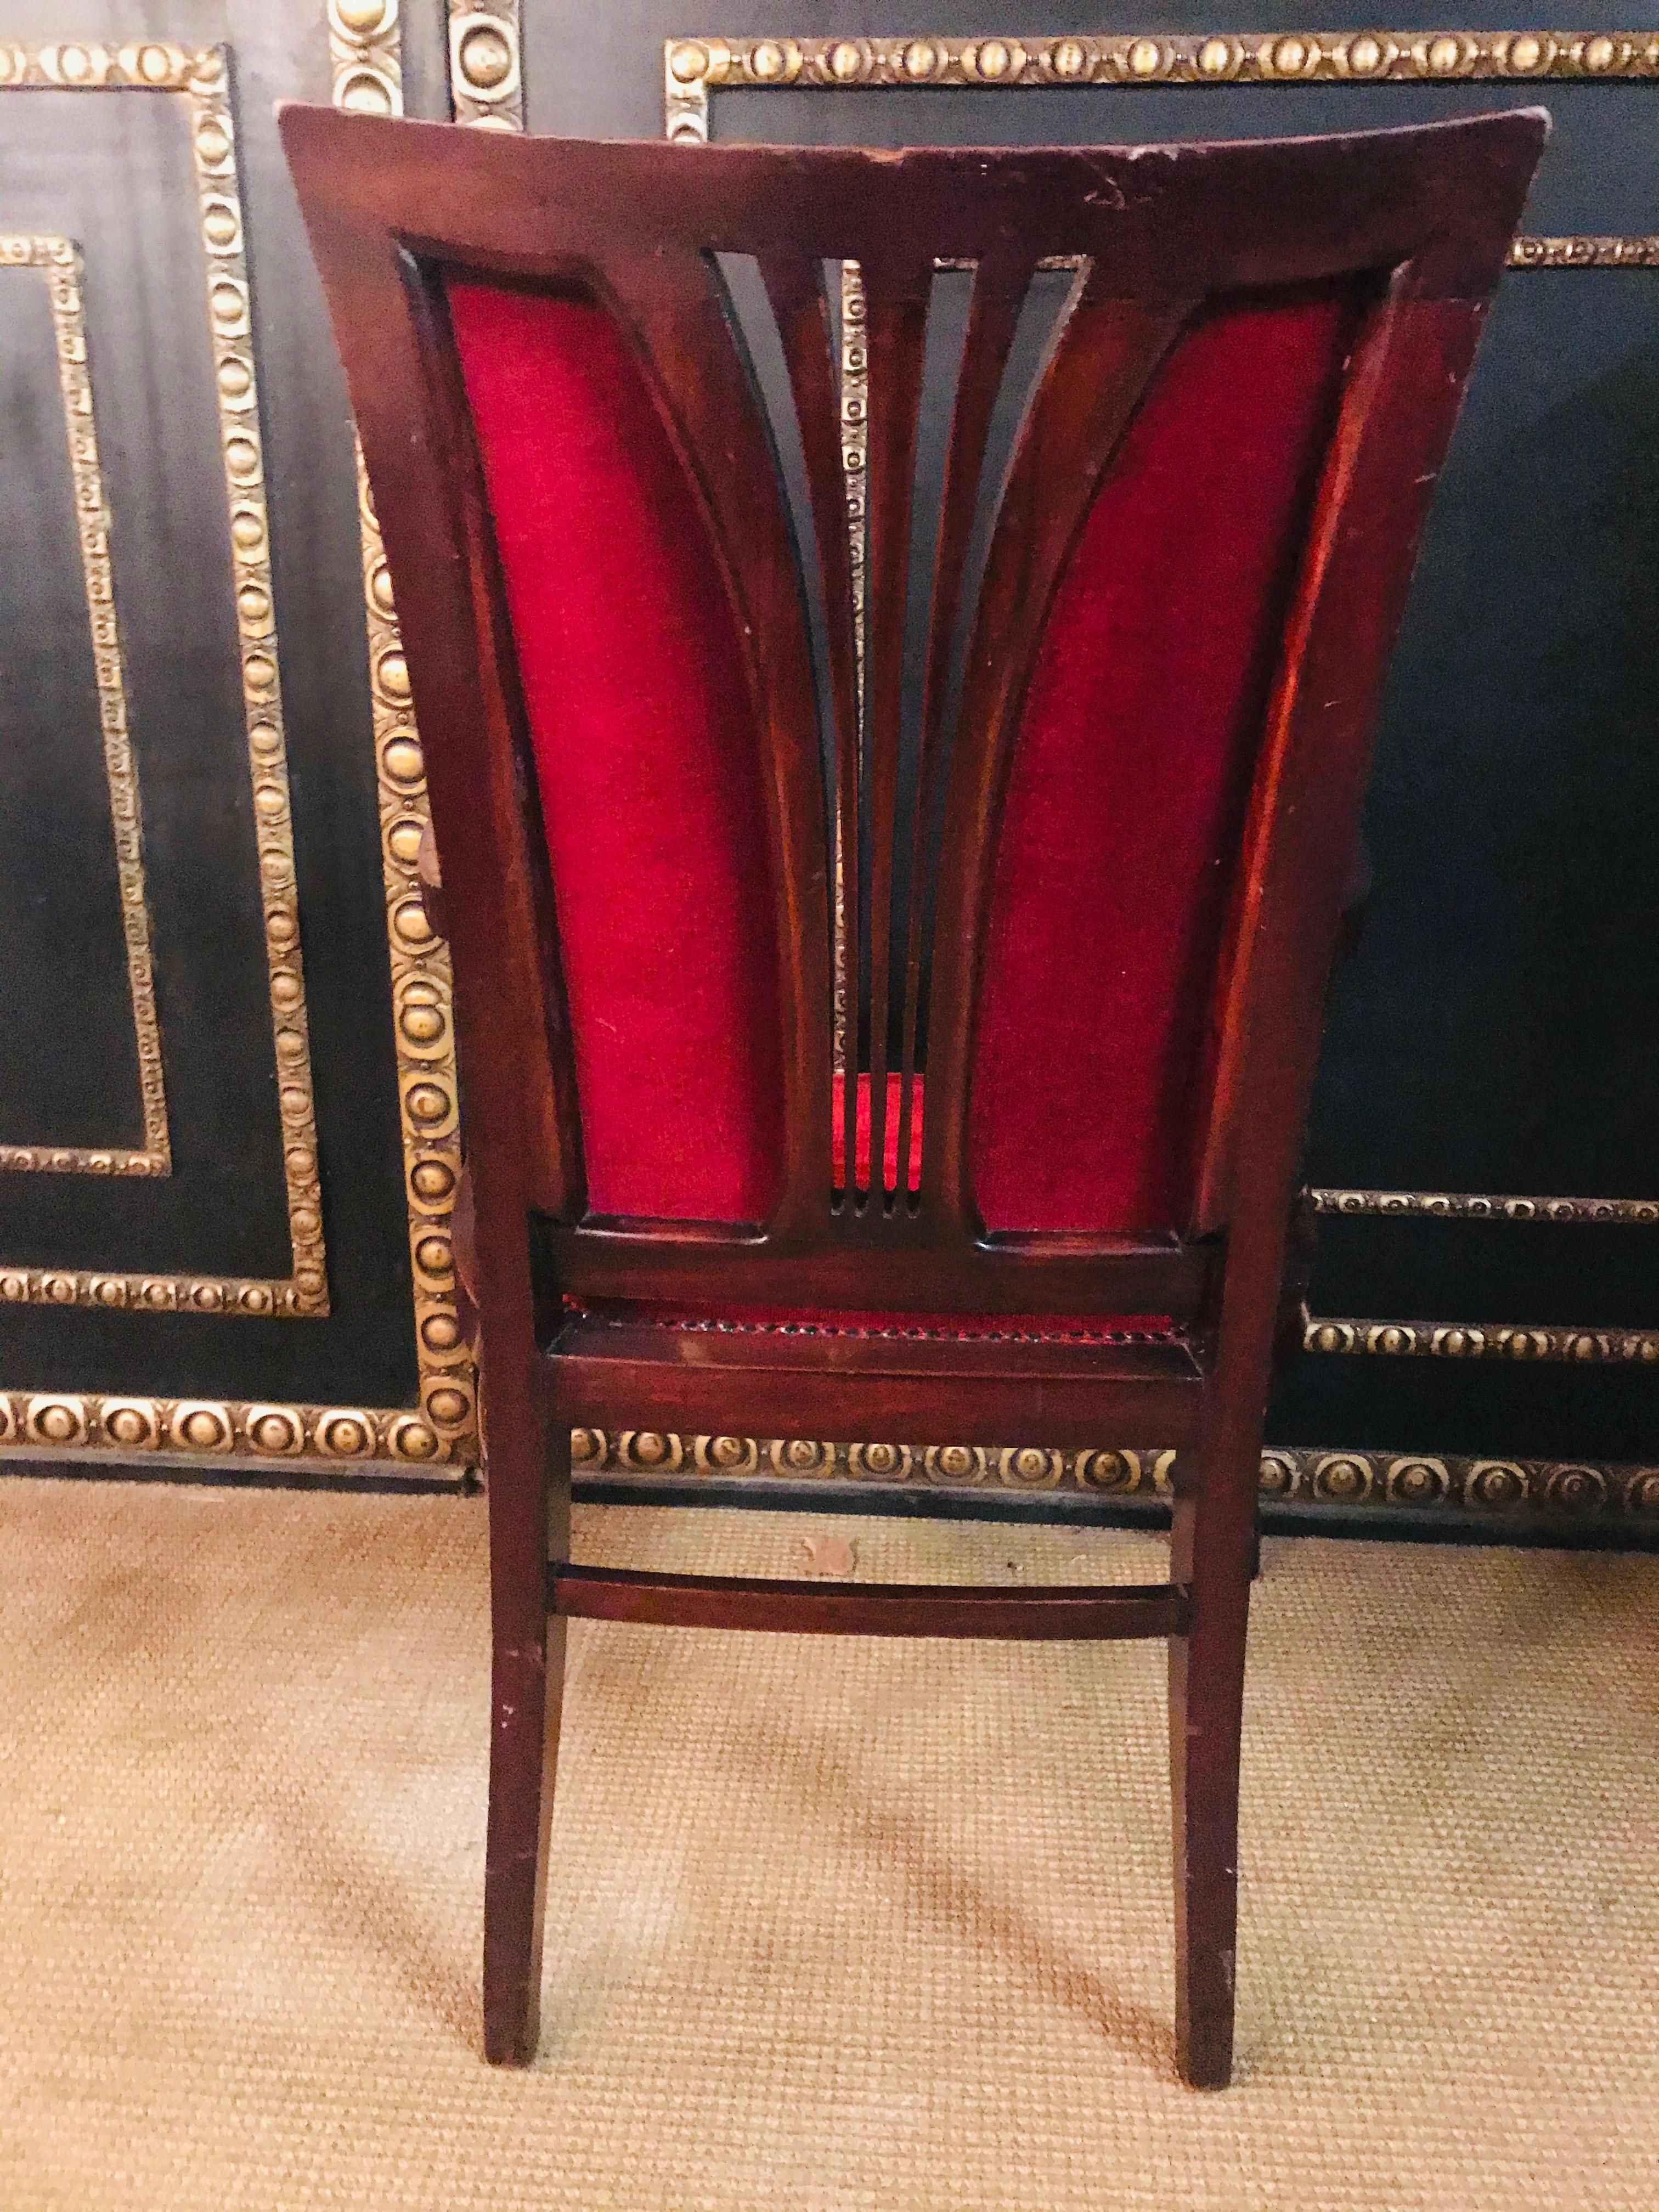 Beautiful antique red Art Nouveau or Jugendstil 20th Century Armchair mahogany  5